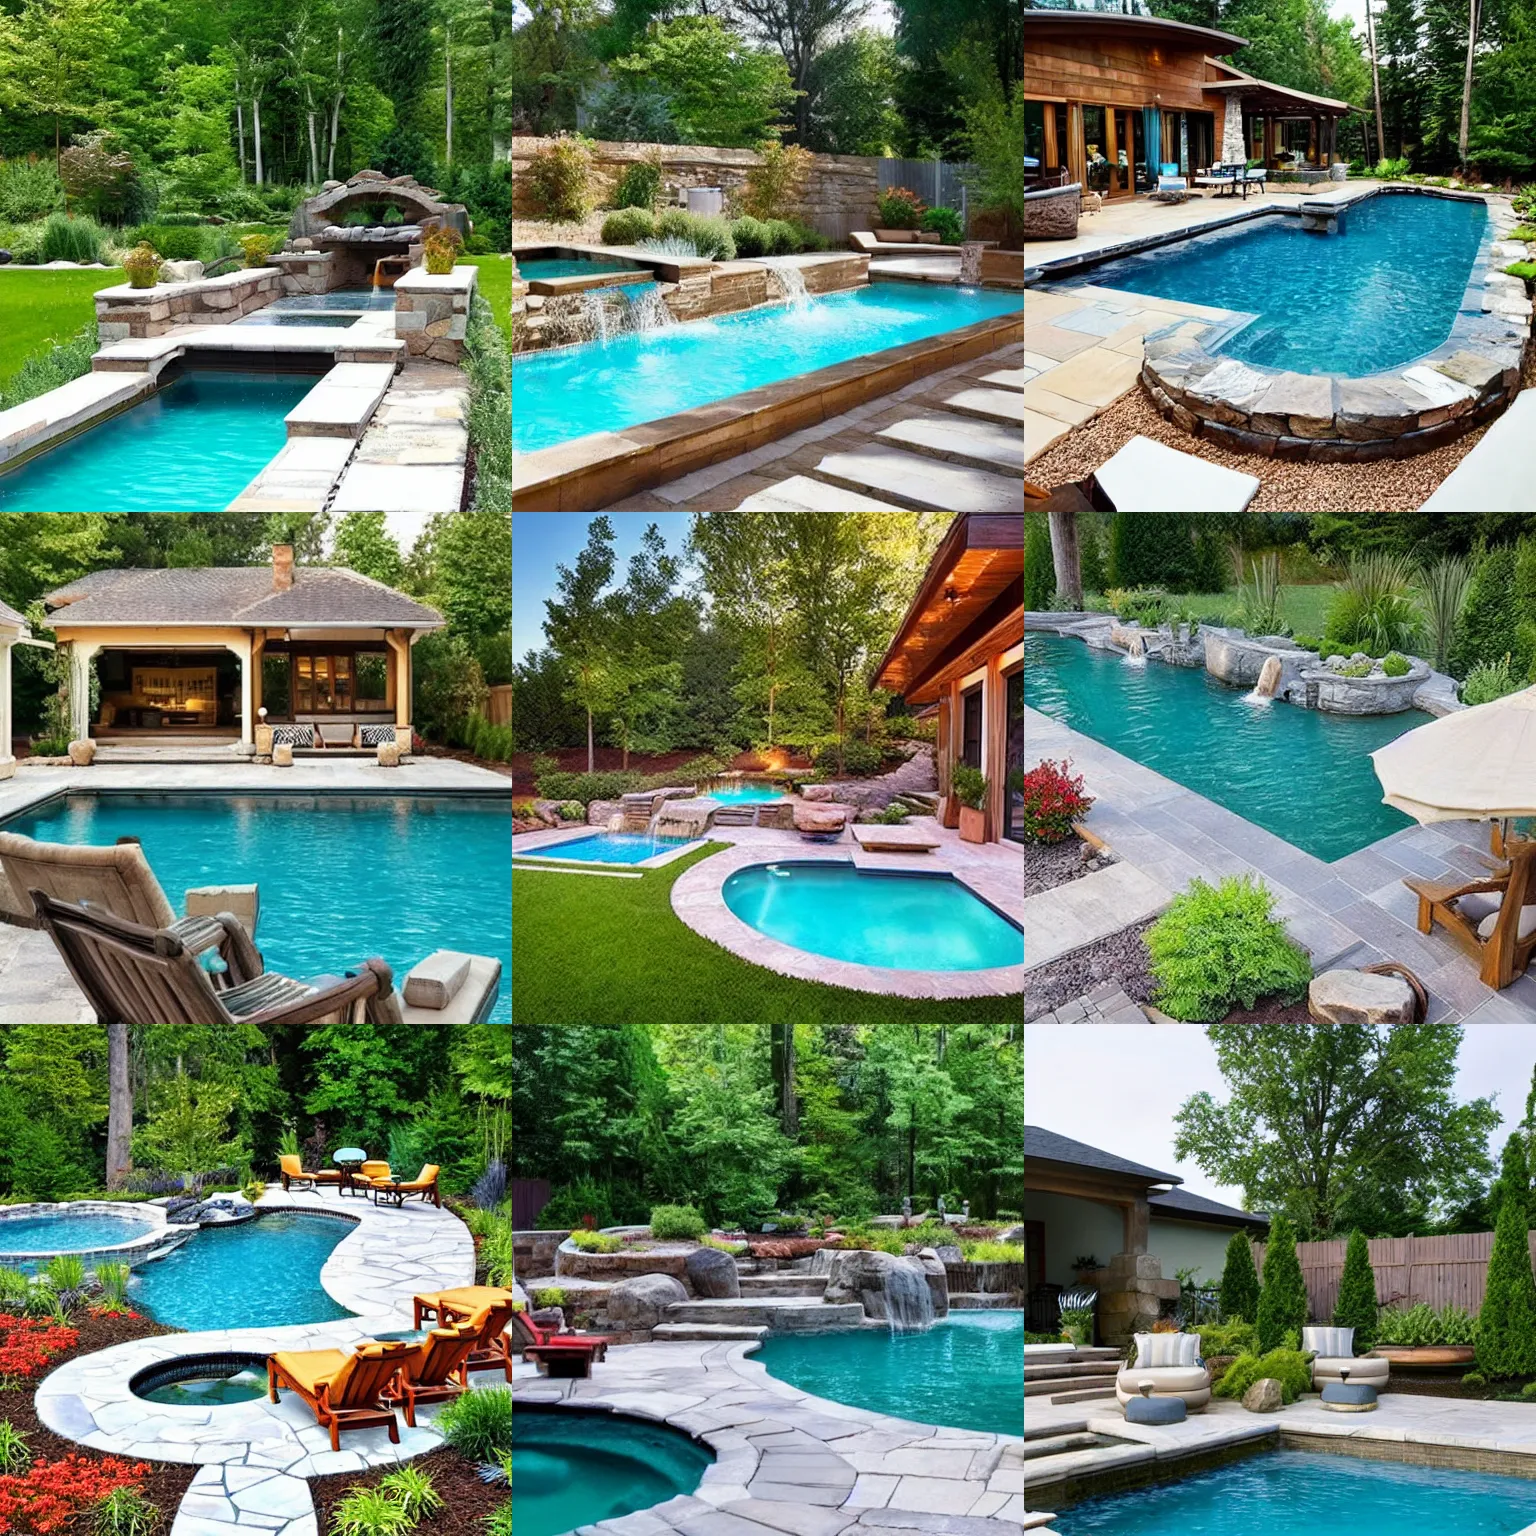 Image similar to Beautiful backyard pool with stone walkway and wooden lounge chairs